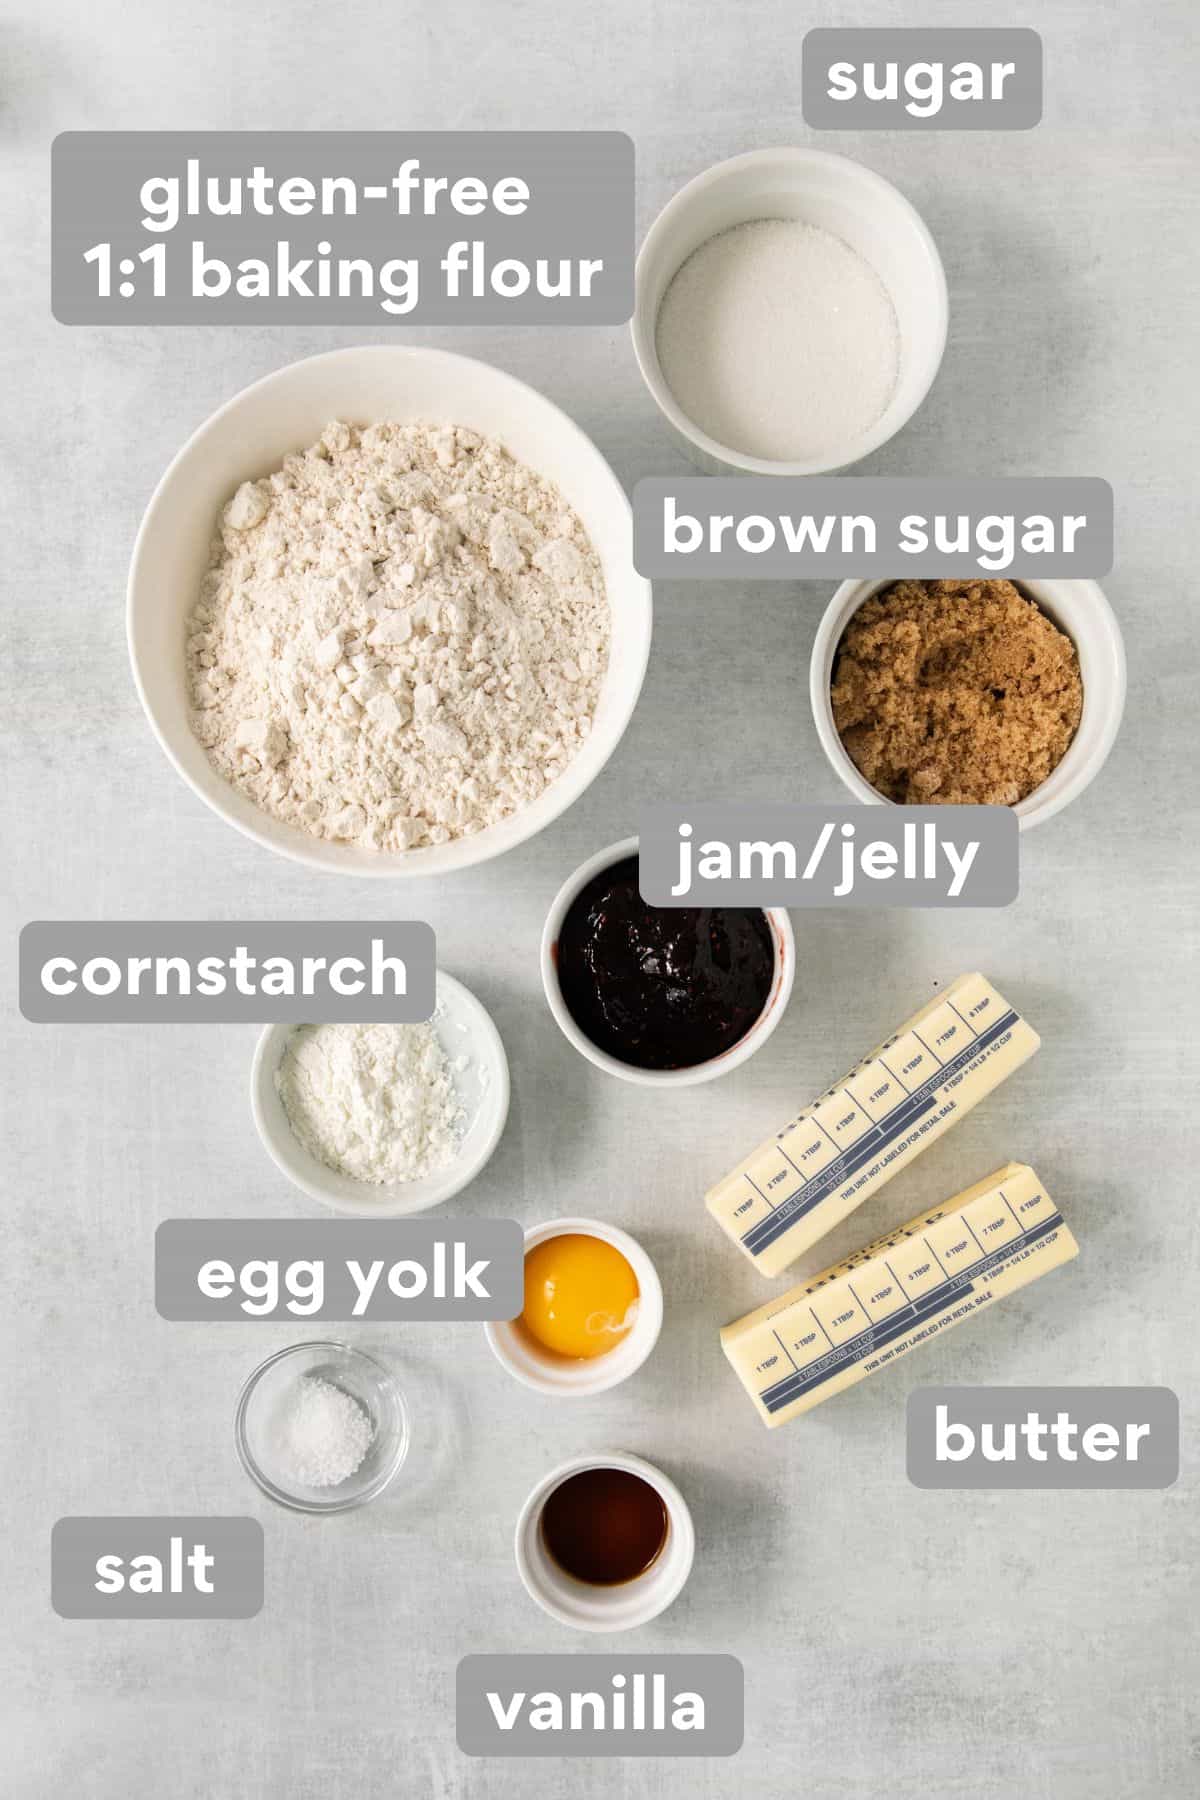 Gluten-free thumbprint cookie ingredients on a counter top